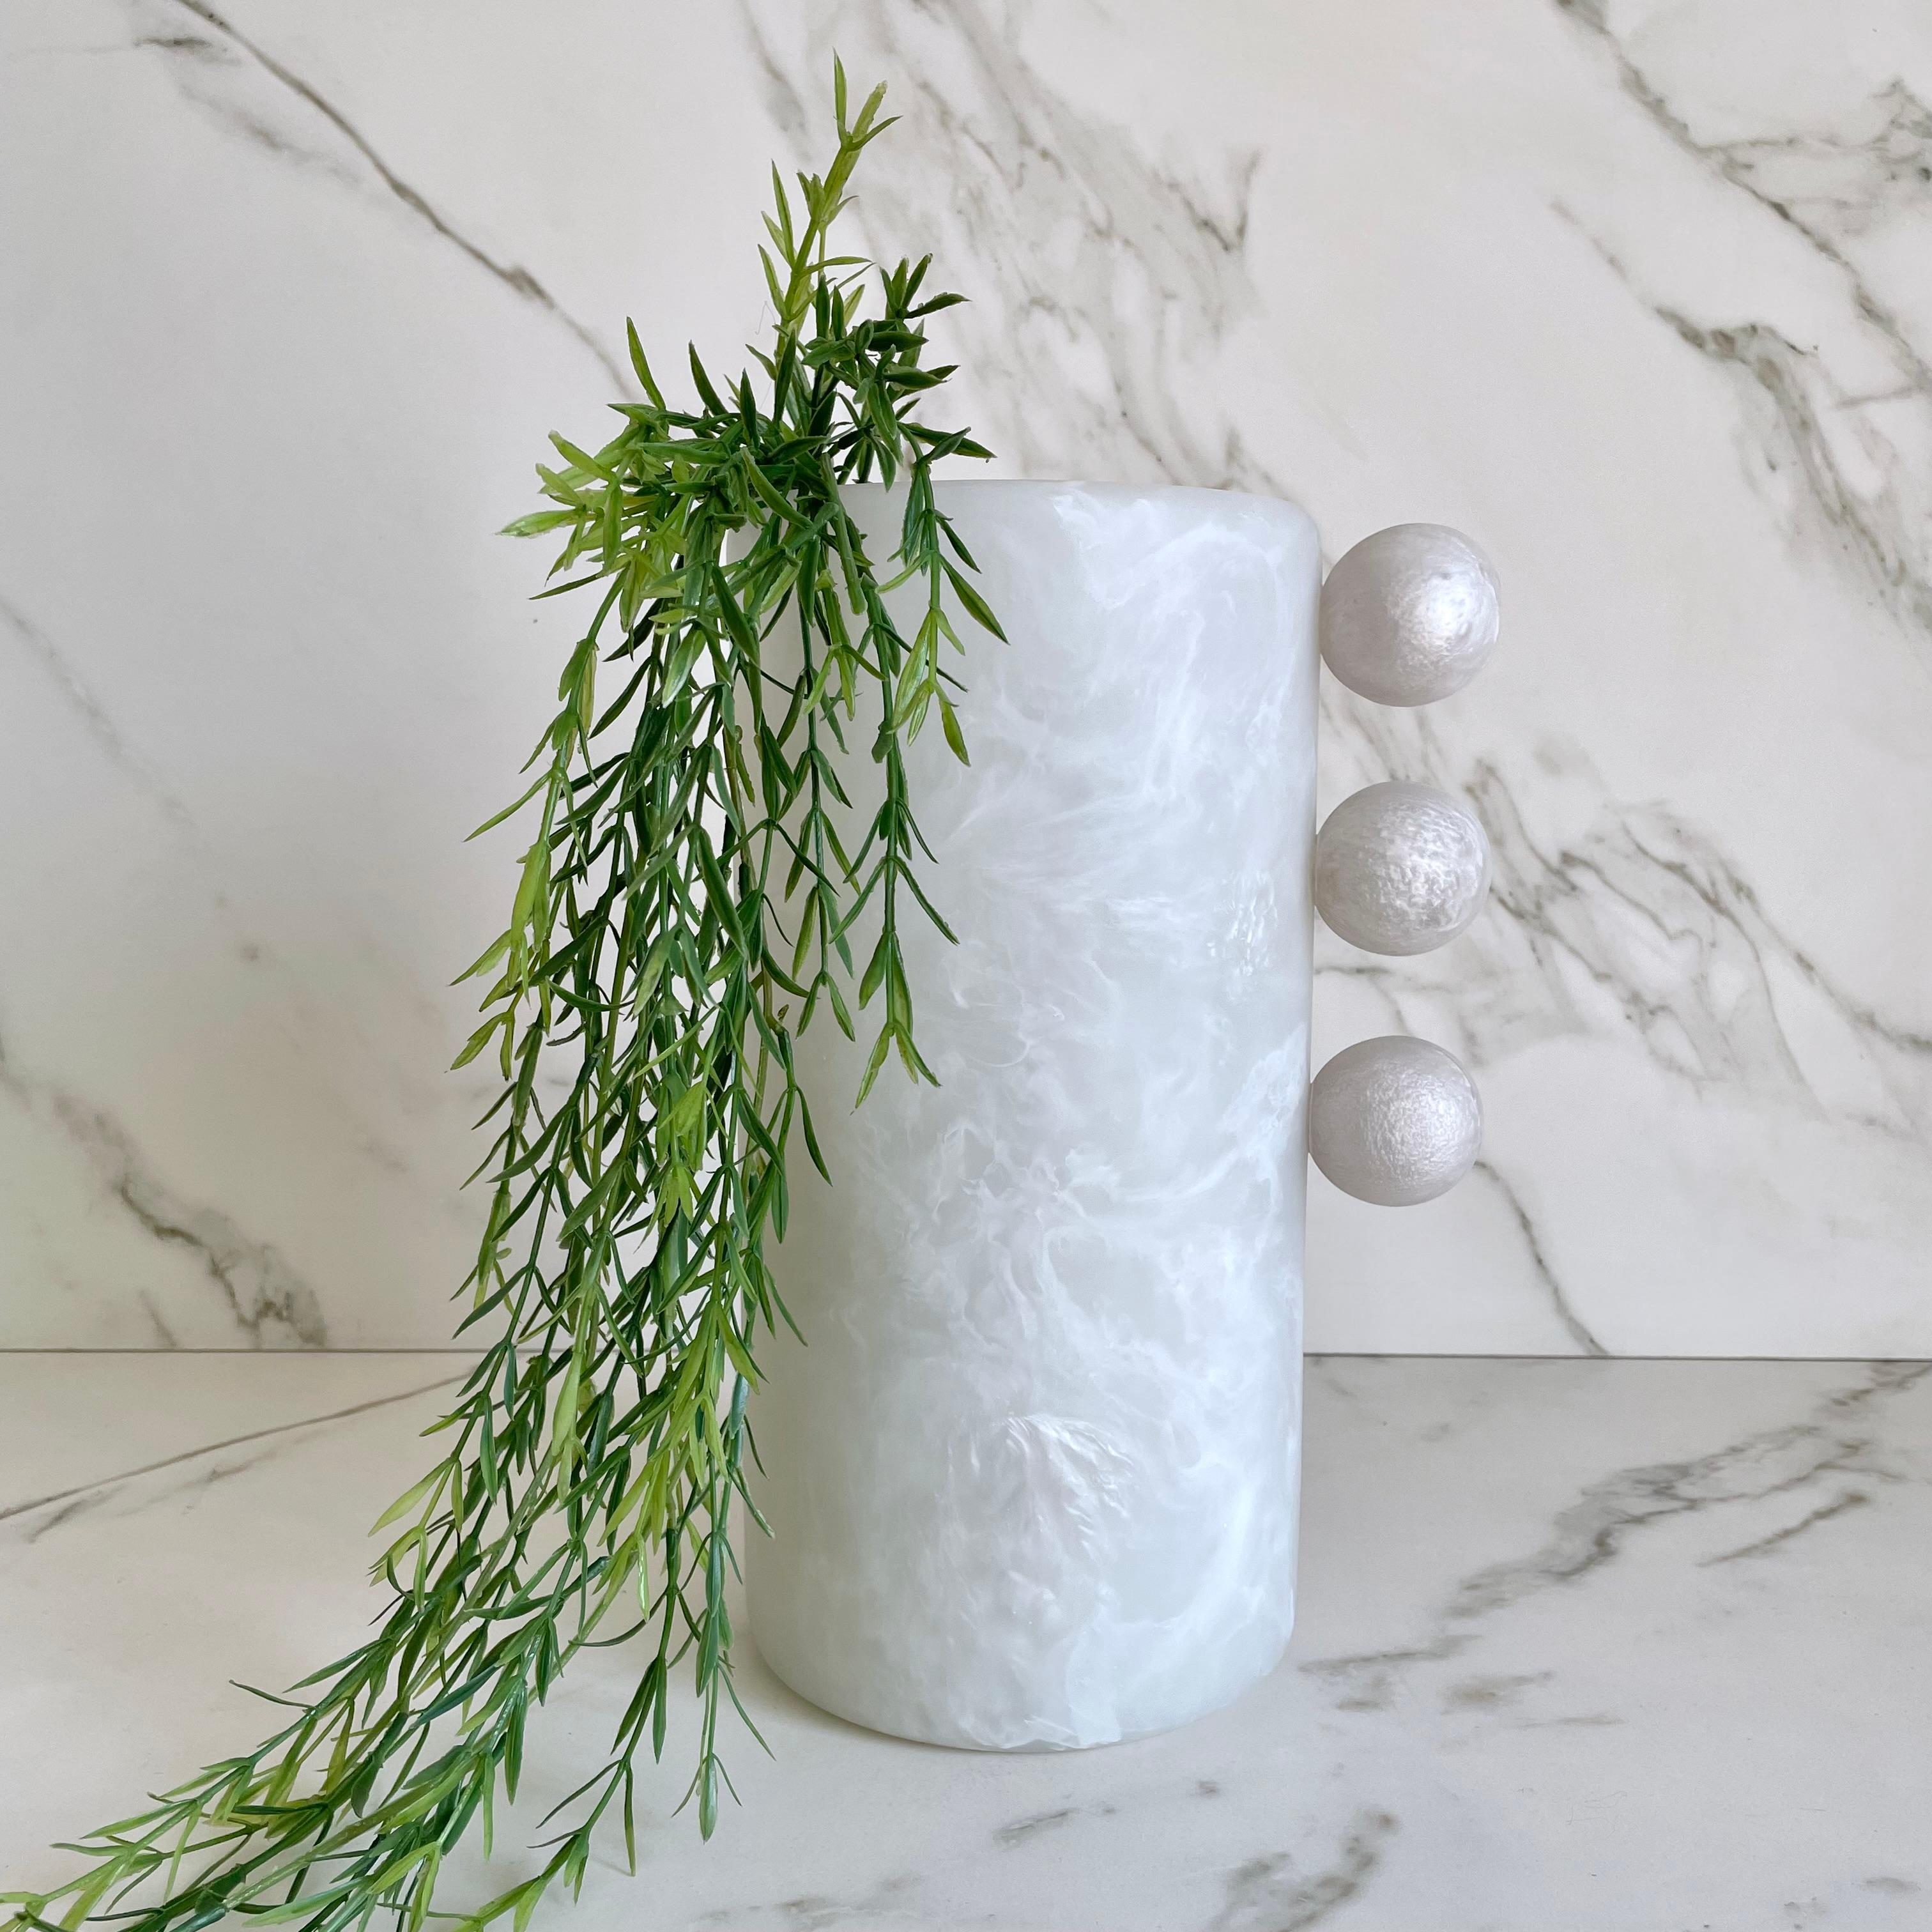 Striking and elegant, the Tall Bubble Vase has a unique silhouette that brings a modern and playful feel to any space. Styled in built-ins or filled with florals, this vase is as versatile as it is beautiful.

Available in two sizes: Tall and